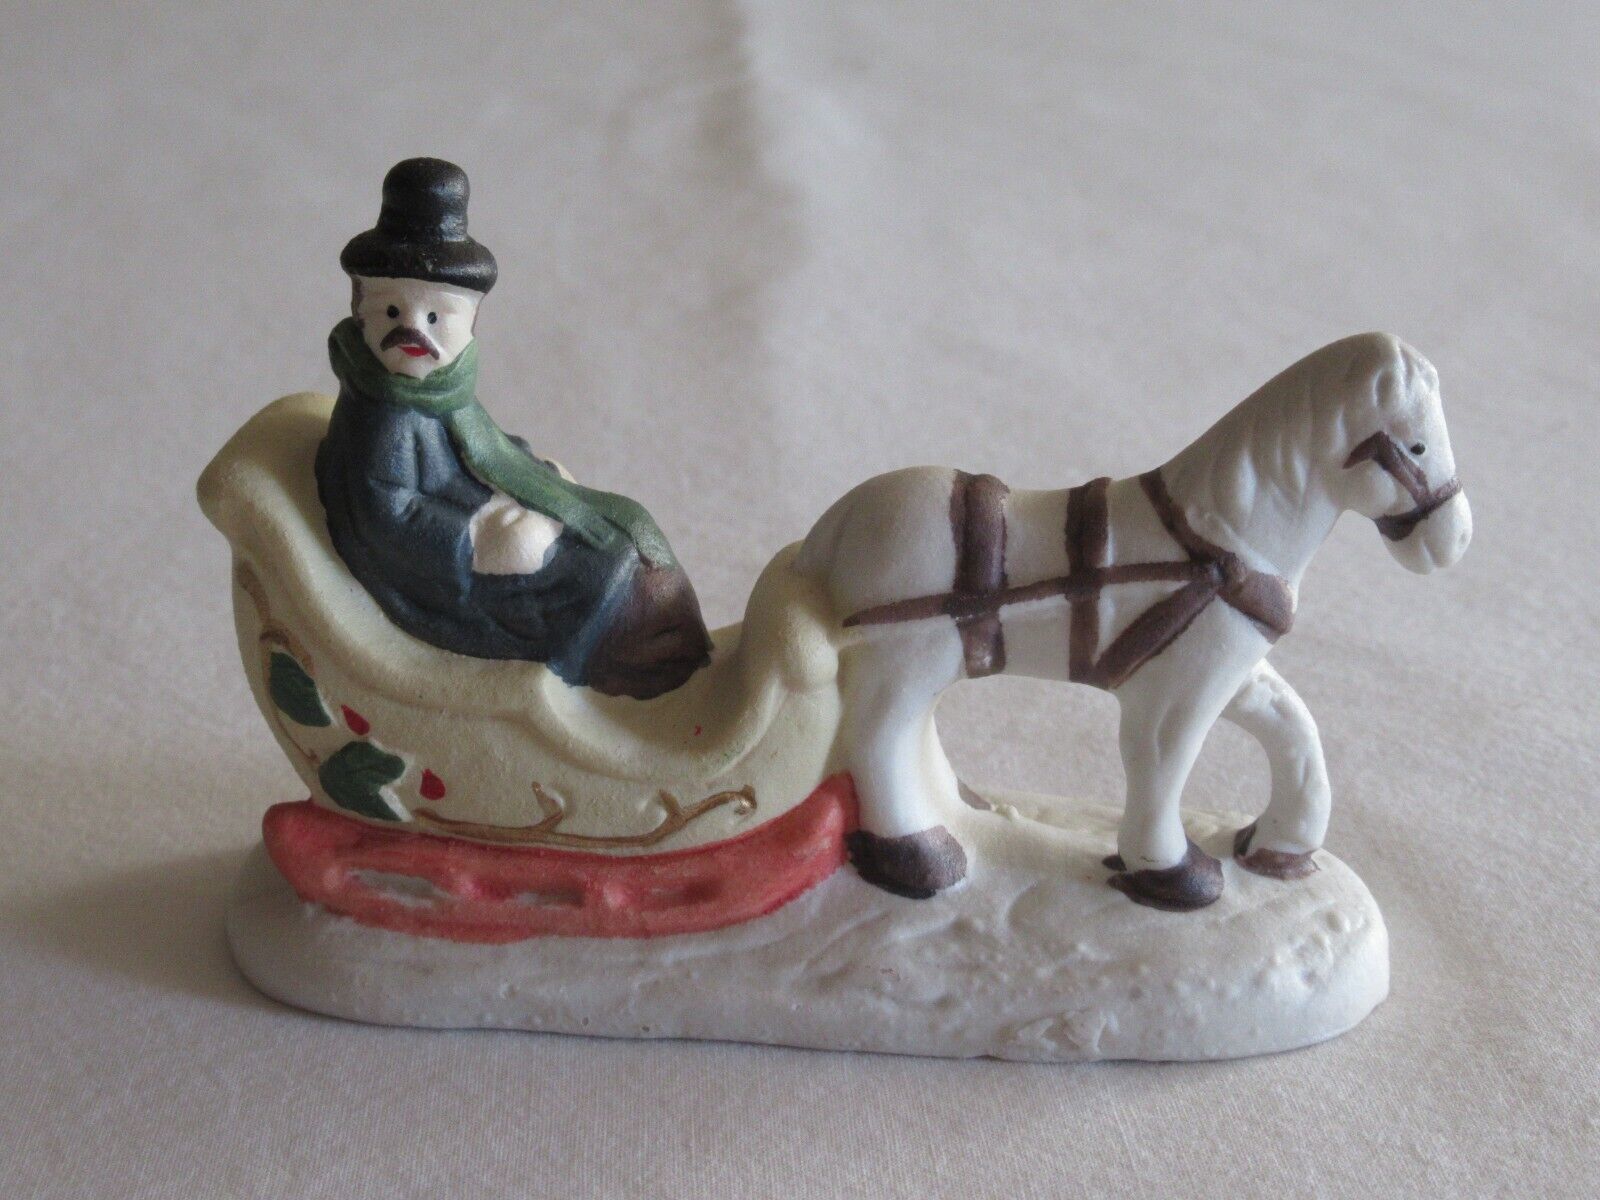 Primary image for Christmas Village Carol Wright Holiday Man Horse SLEIGH RIDE Figurine 3.75"